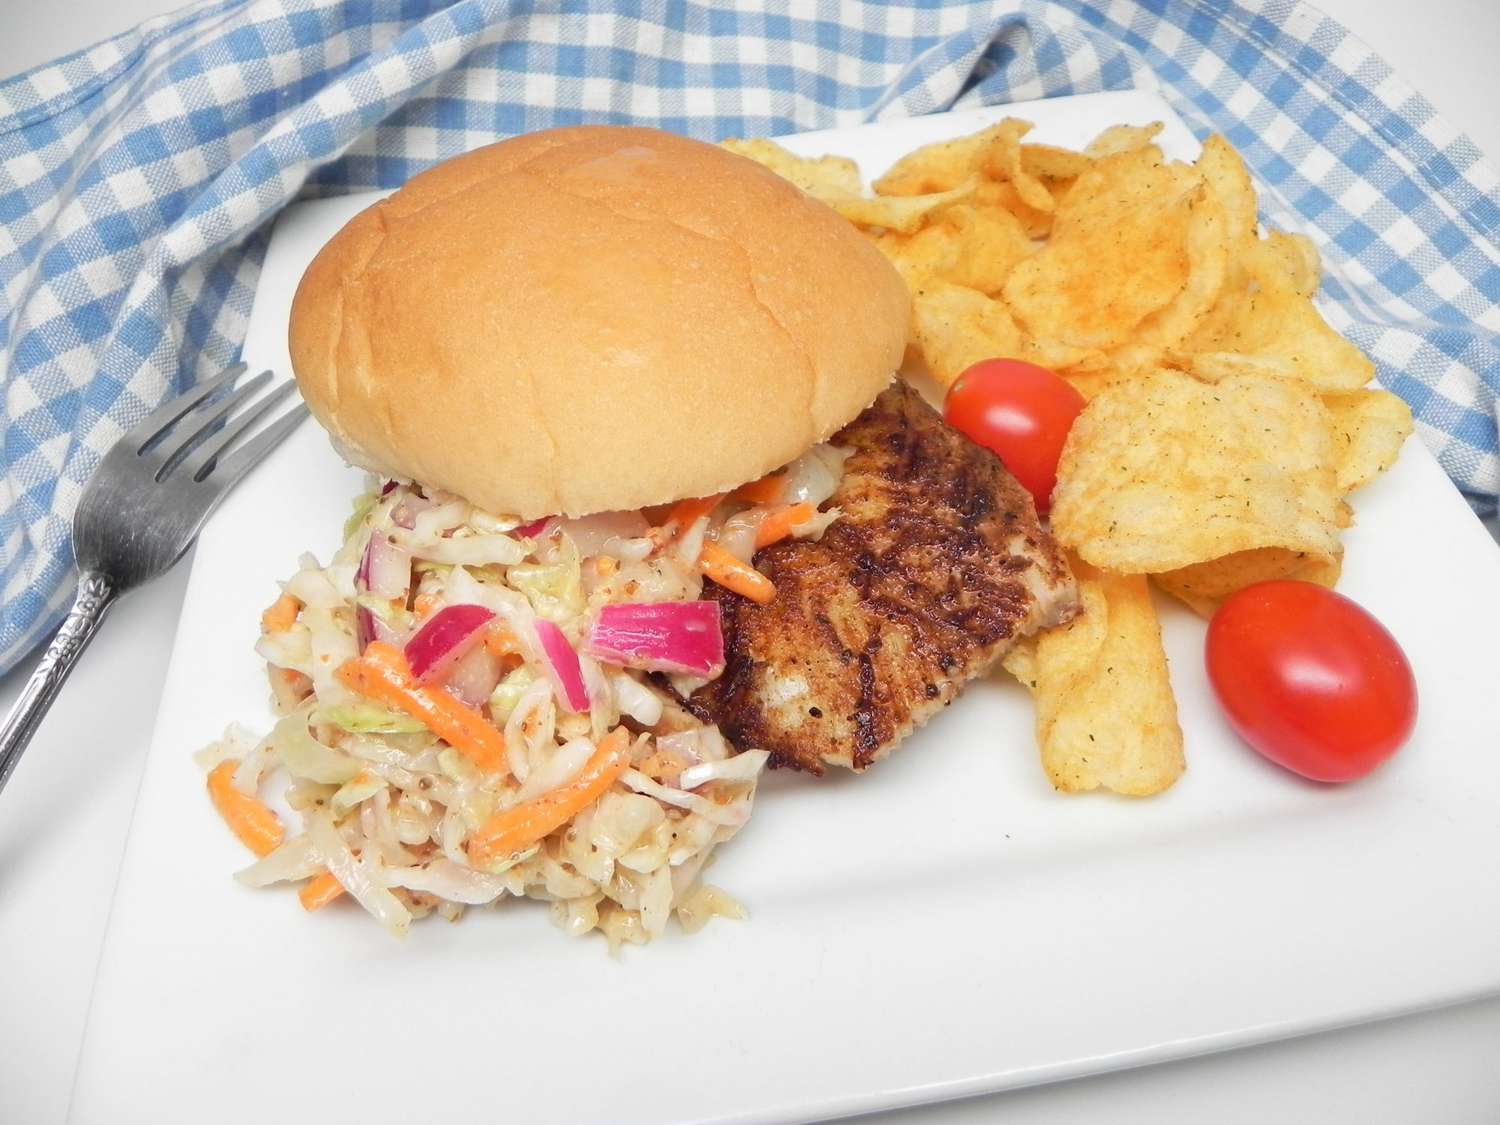 Grilled Blackened Fish Sandwiches with Homemade Slaw